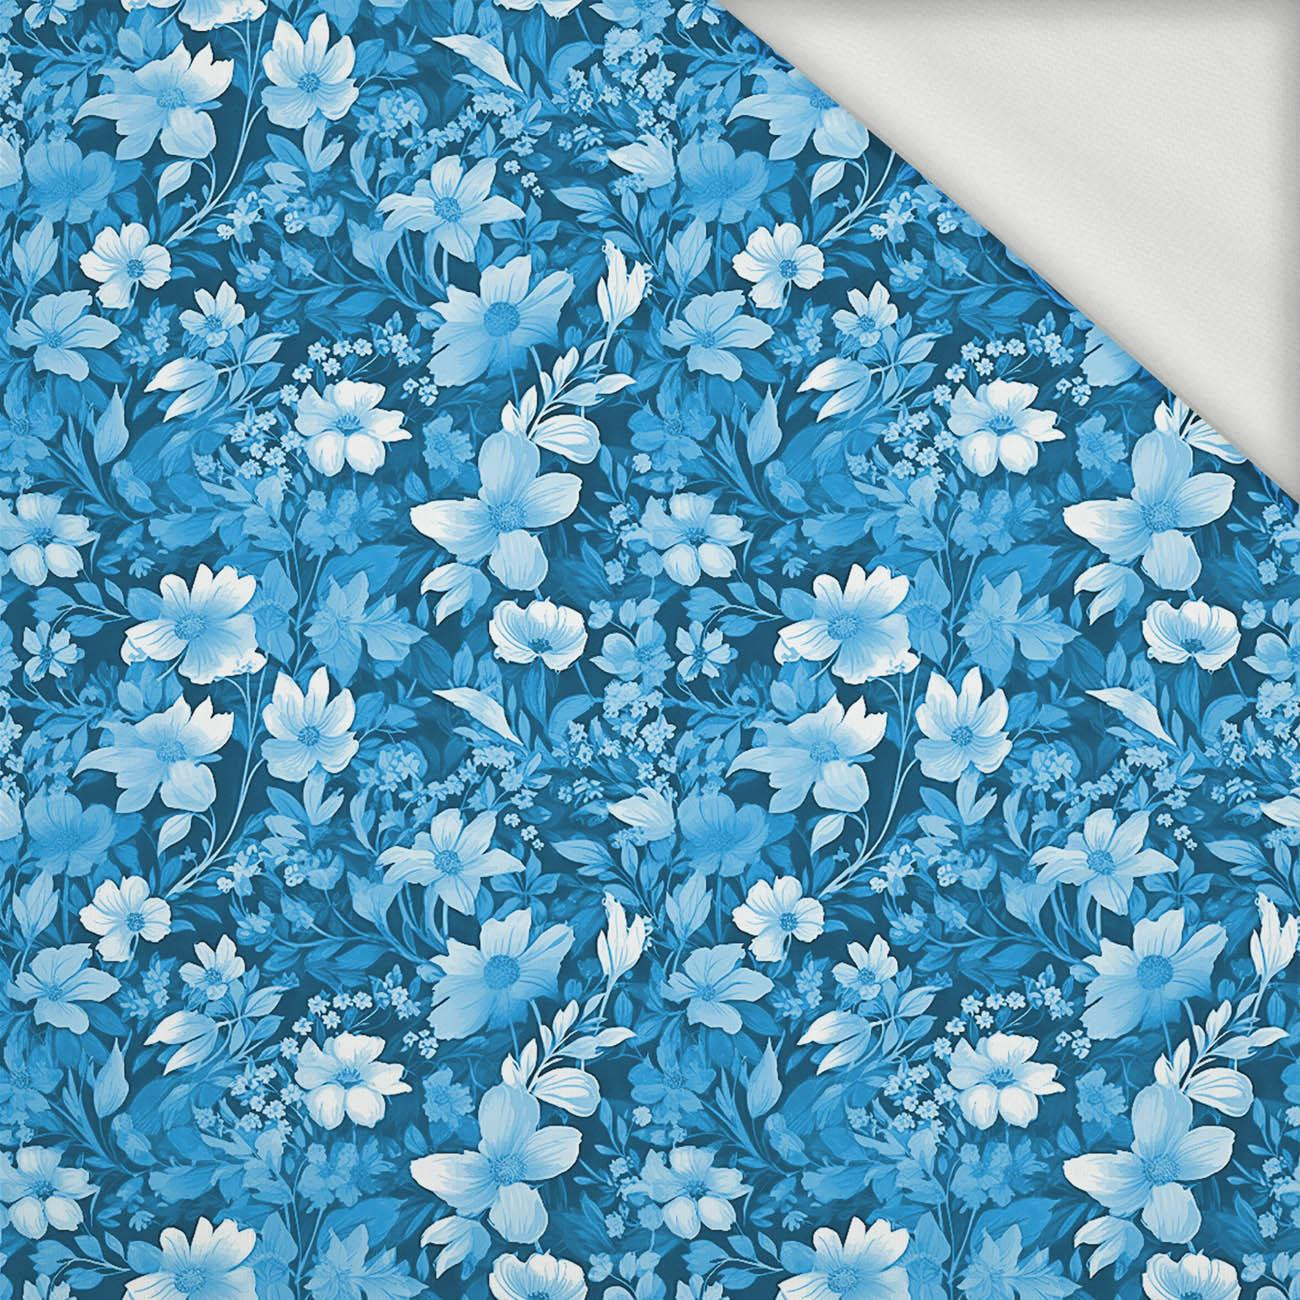 TRANQUIL BLUE / FLOWERS - looped knit fabric